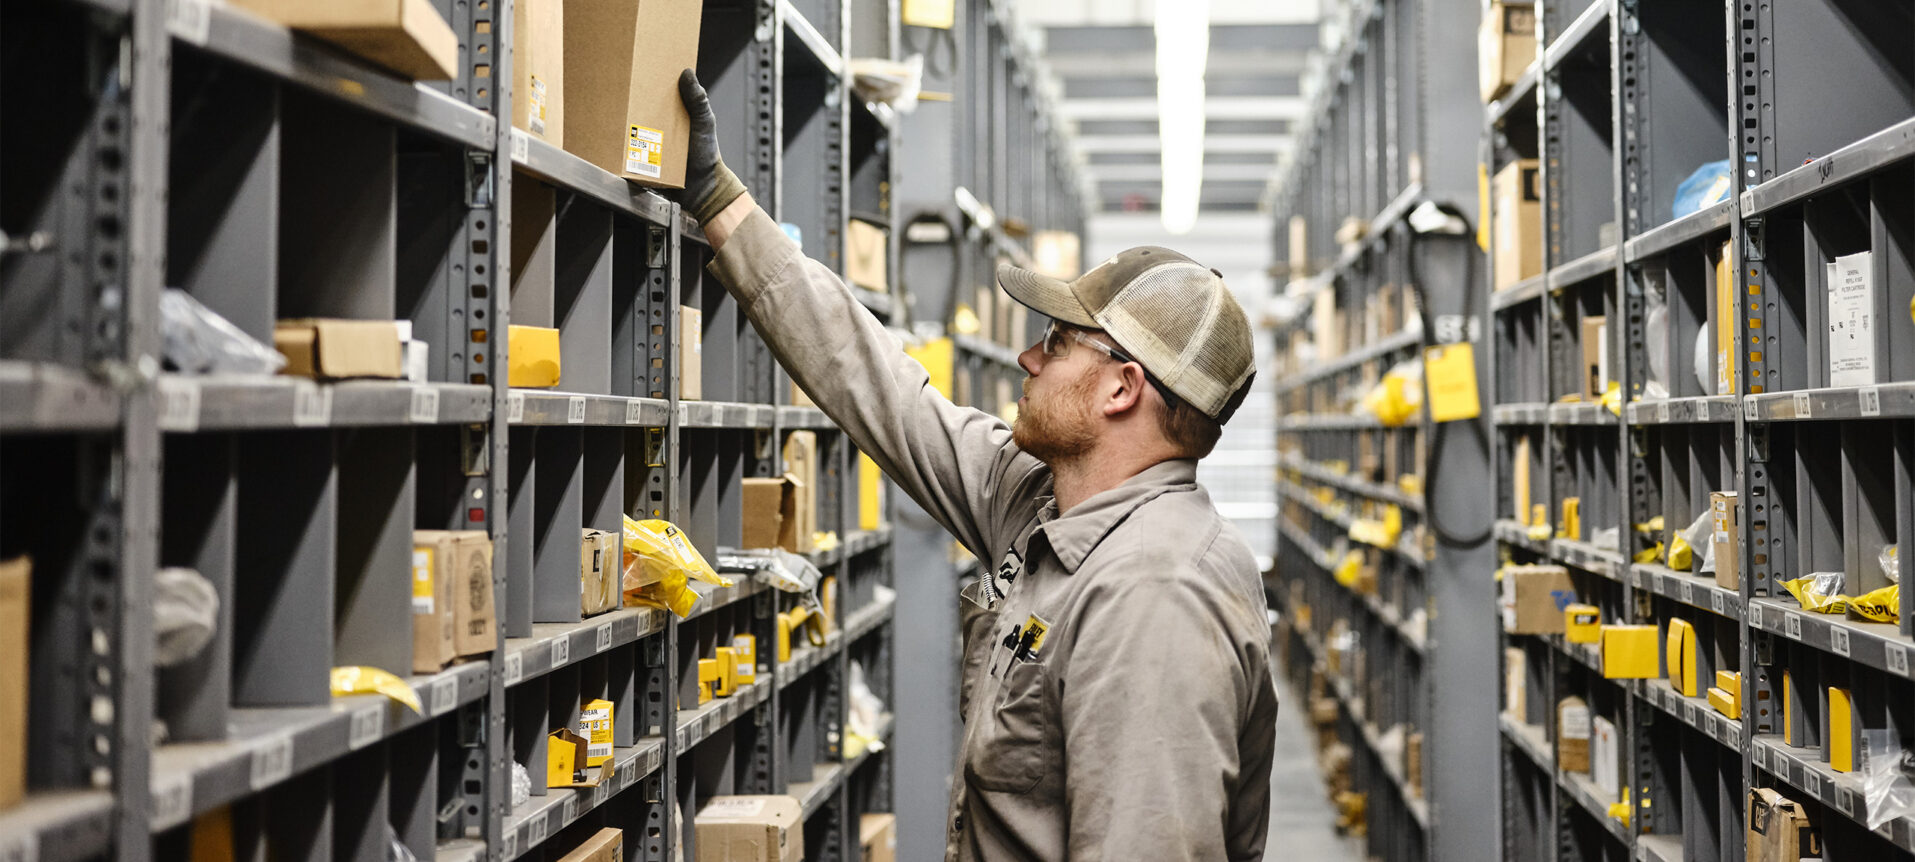 Employee retrieving parts from the warehouse shelf